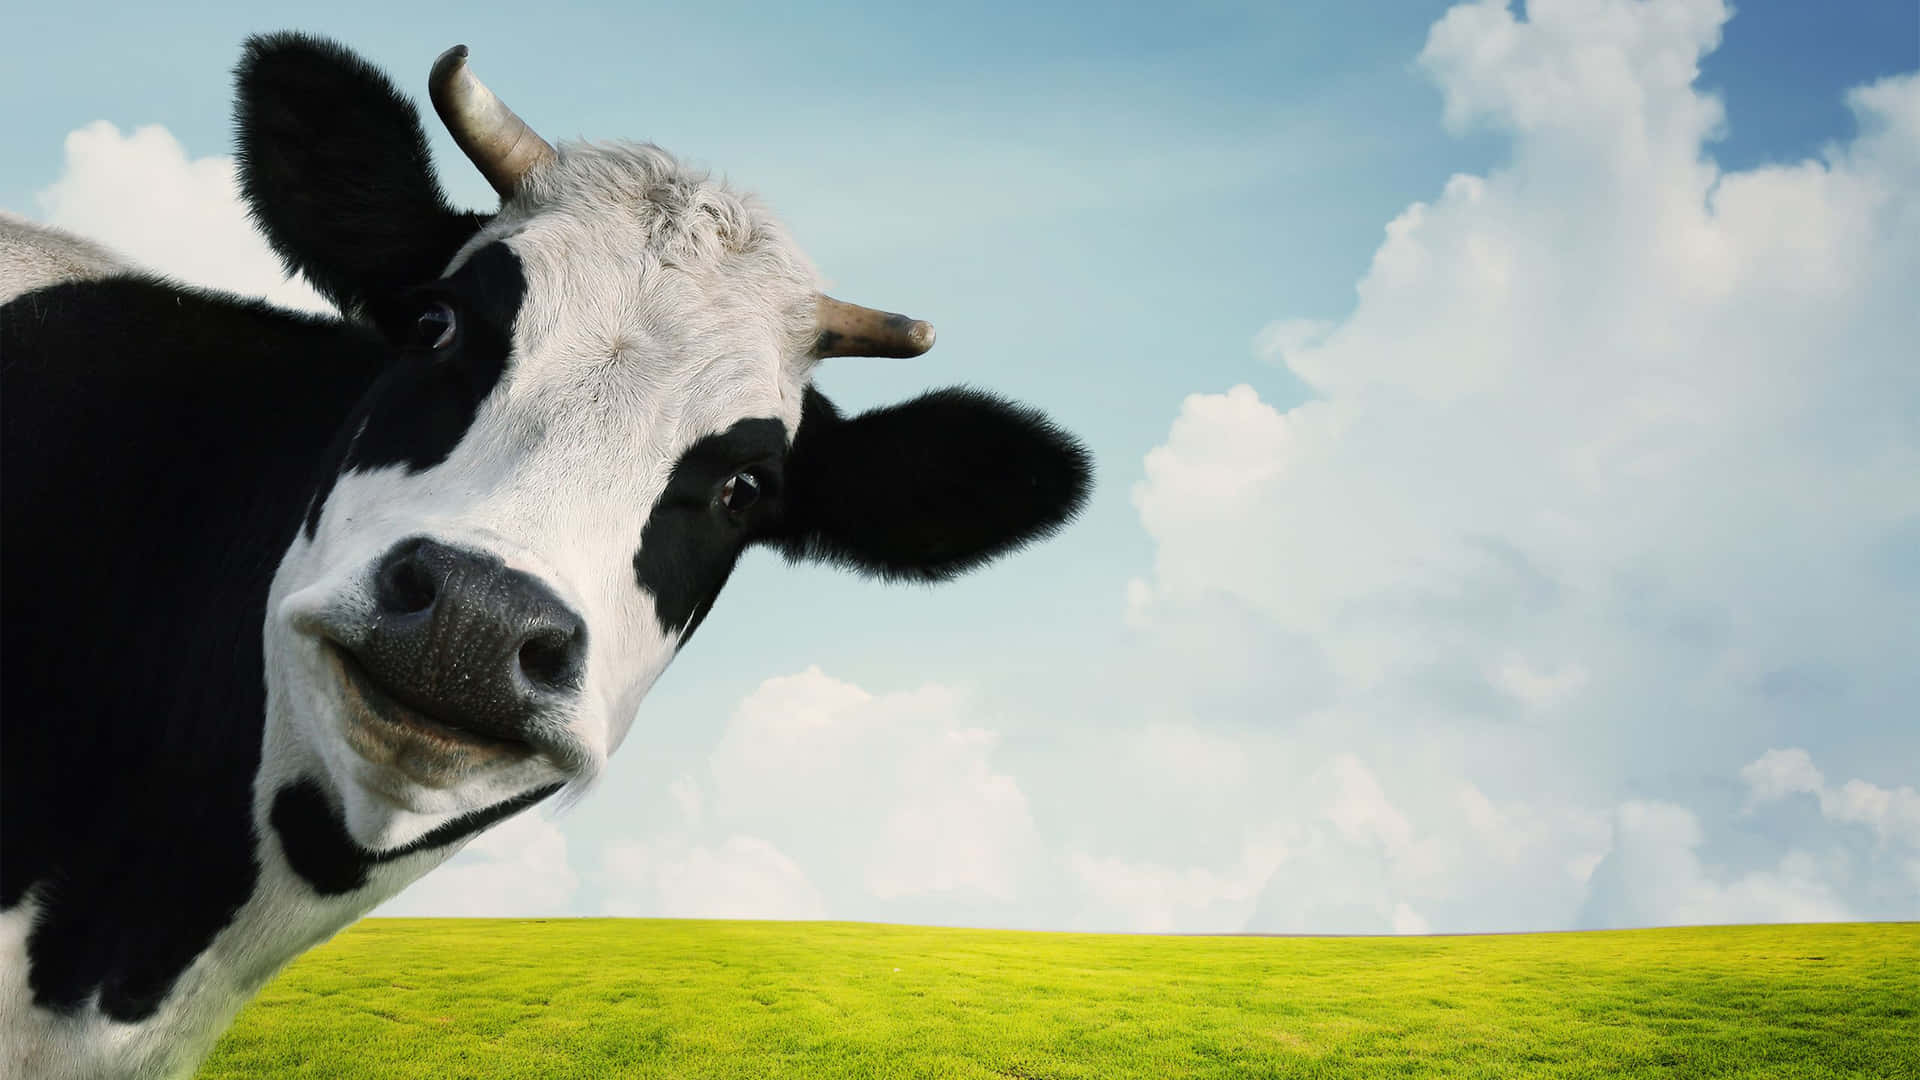 A Cow Is Standing In A Field With A Blue Sky Background